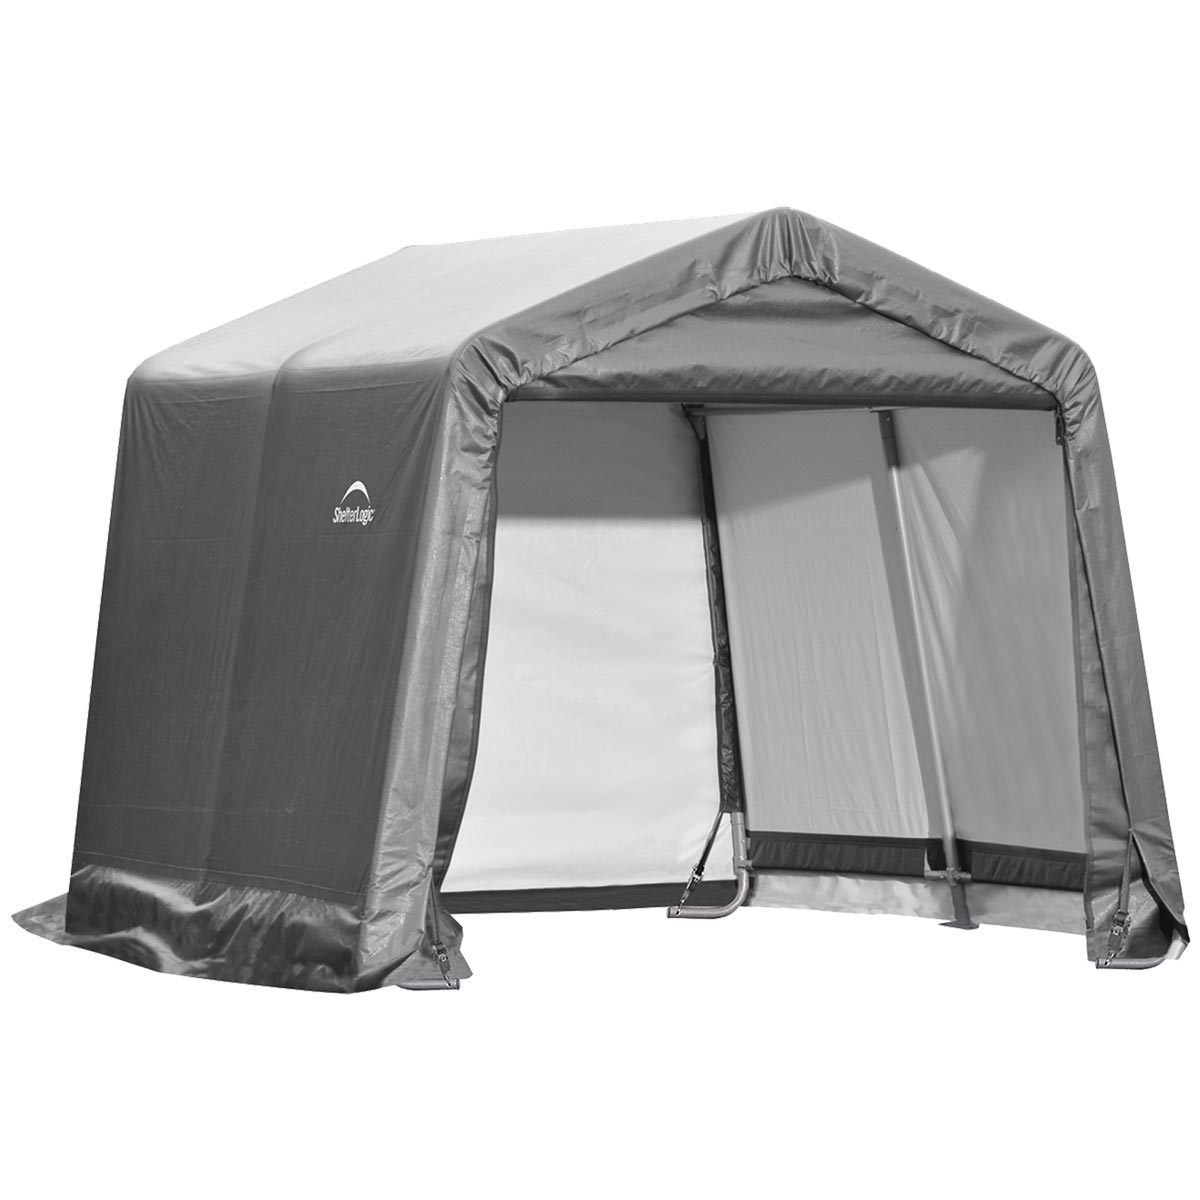 ShelterLogic Shed-in-a-Box - 10-ft x 10-ft x 8-ft